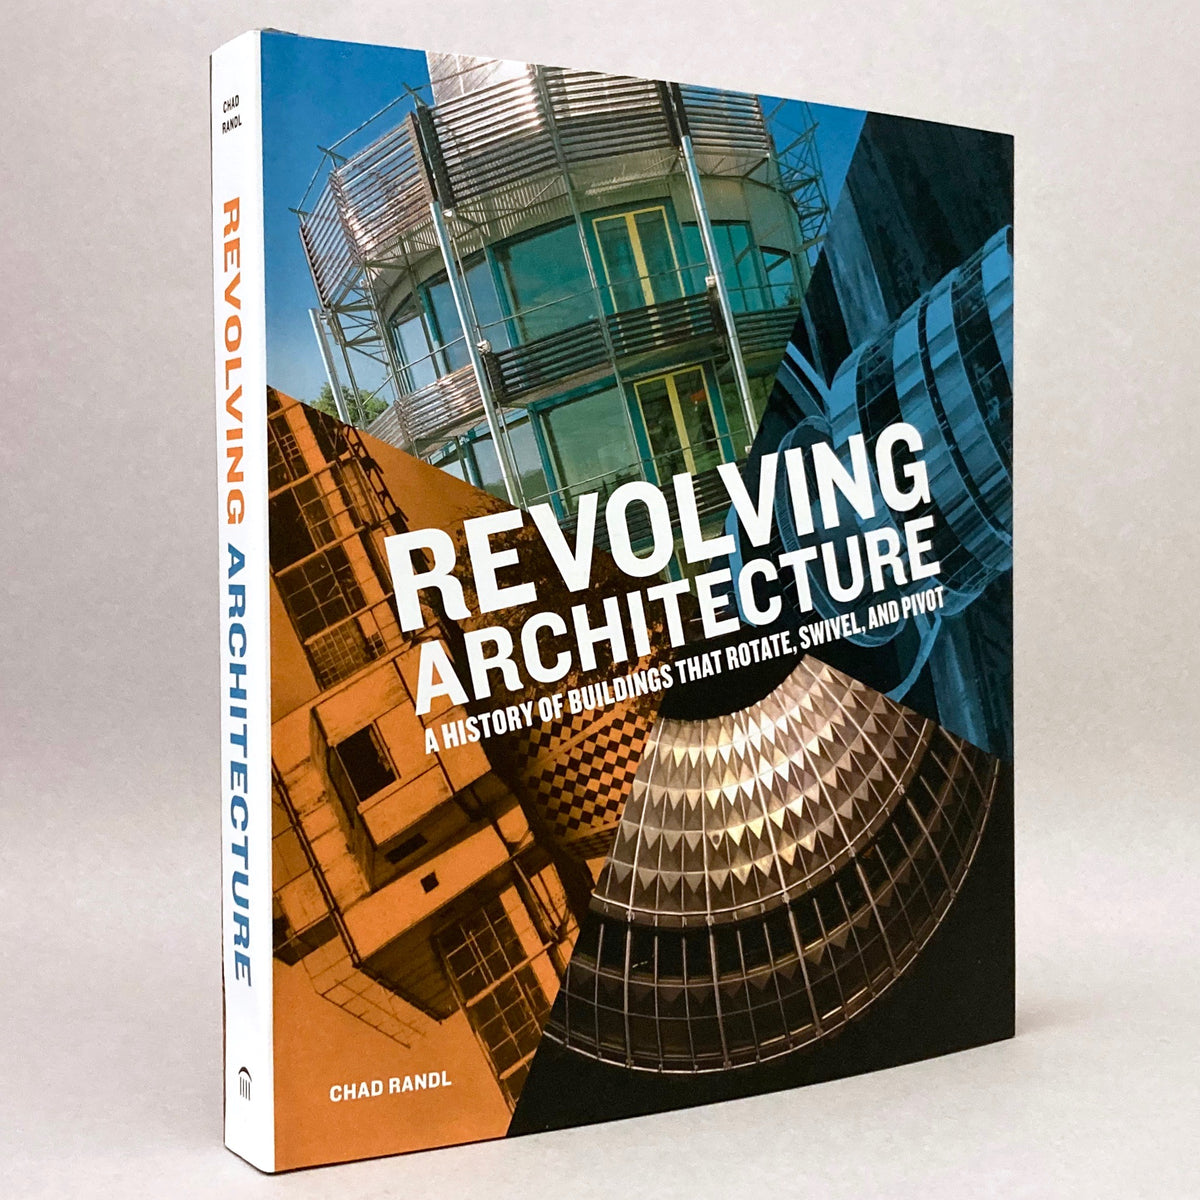 Revolving Architecture: A History of Buildings That Rotate, Swivel, and Pivot